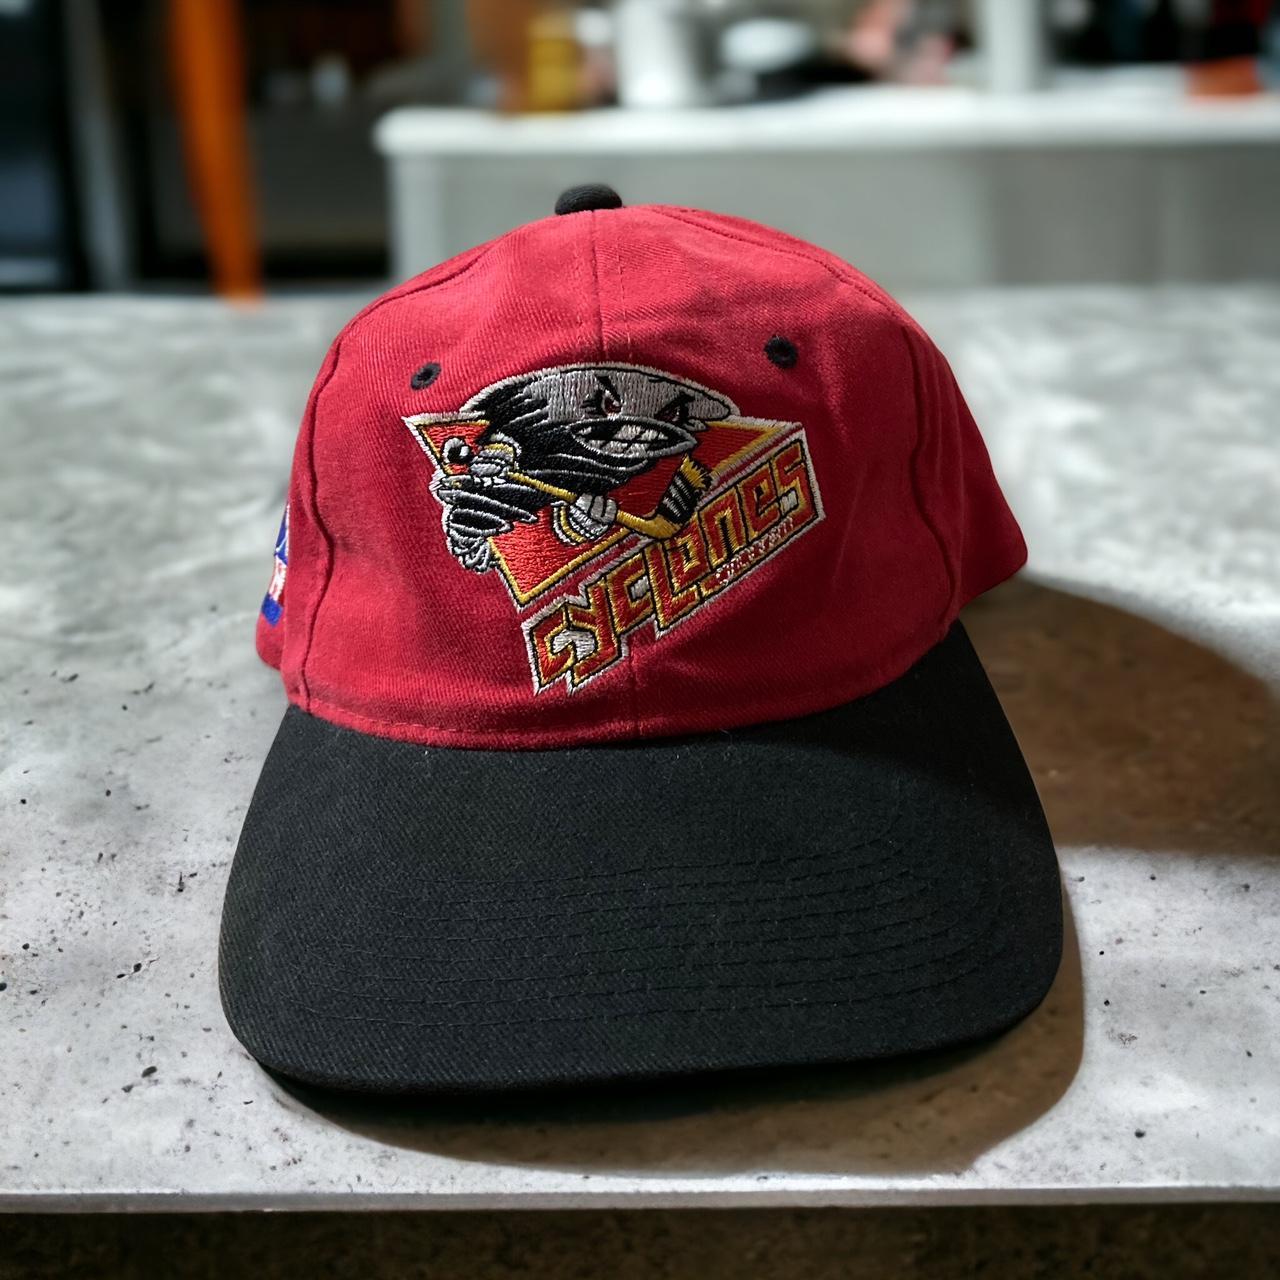 NHL Washington Capitals Vintage Fitted Hat